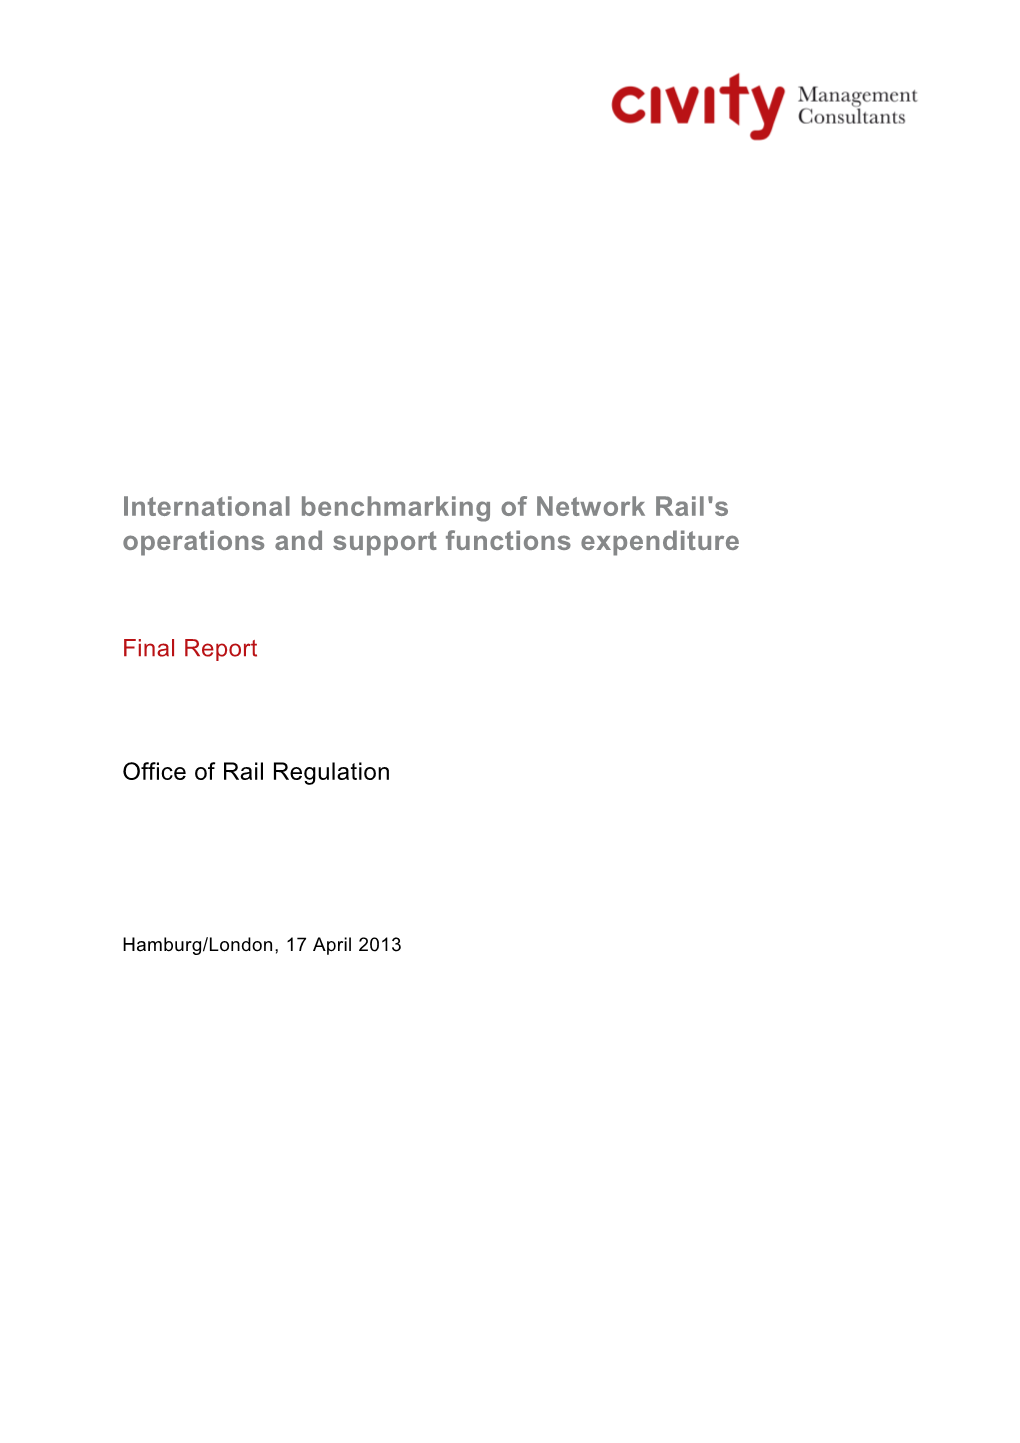 International Benchmarking of Network Rail's Operations and Support Functions Expenditure